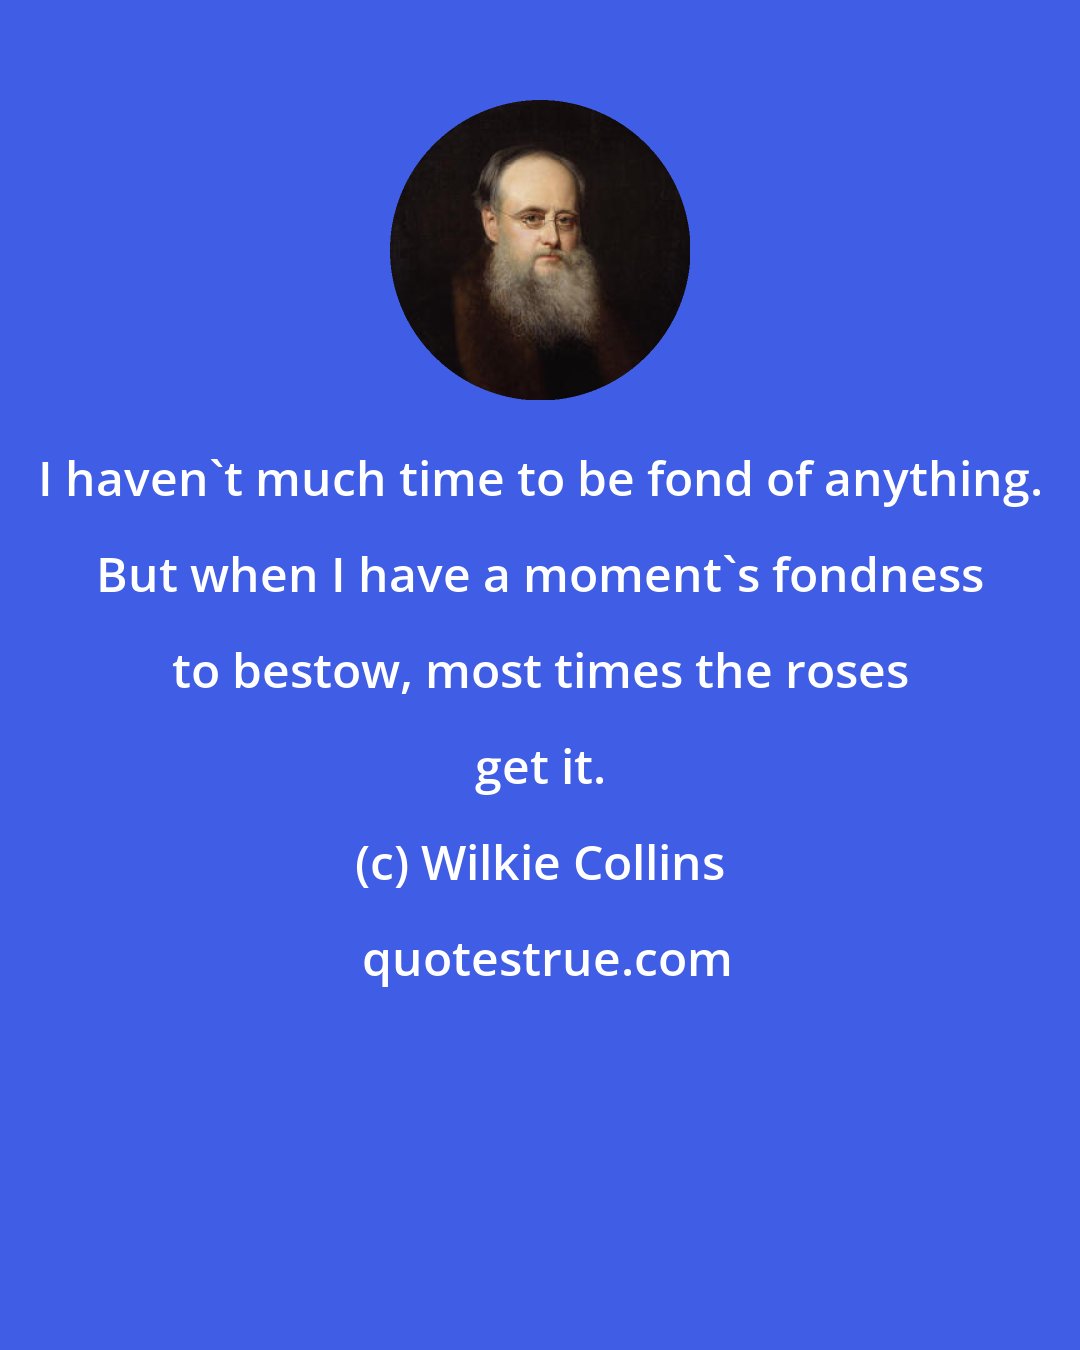 Wilkie Collins: I haven't much time to be fond of anything. But when I have a moment's fondness to bestow, most times the roses get it.